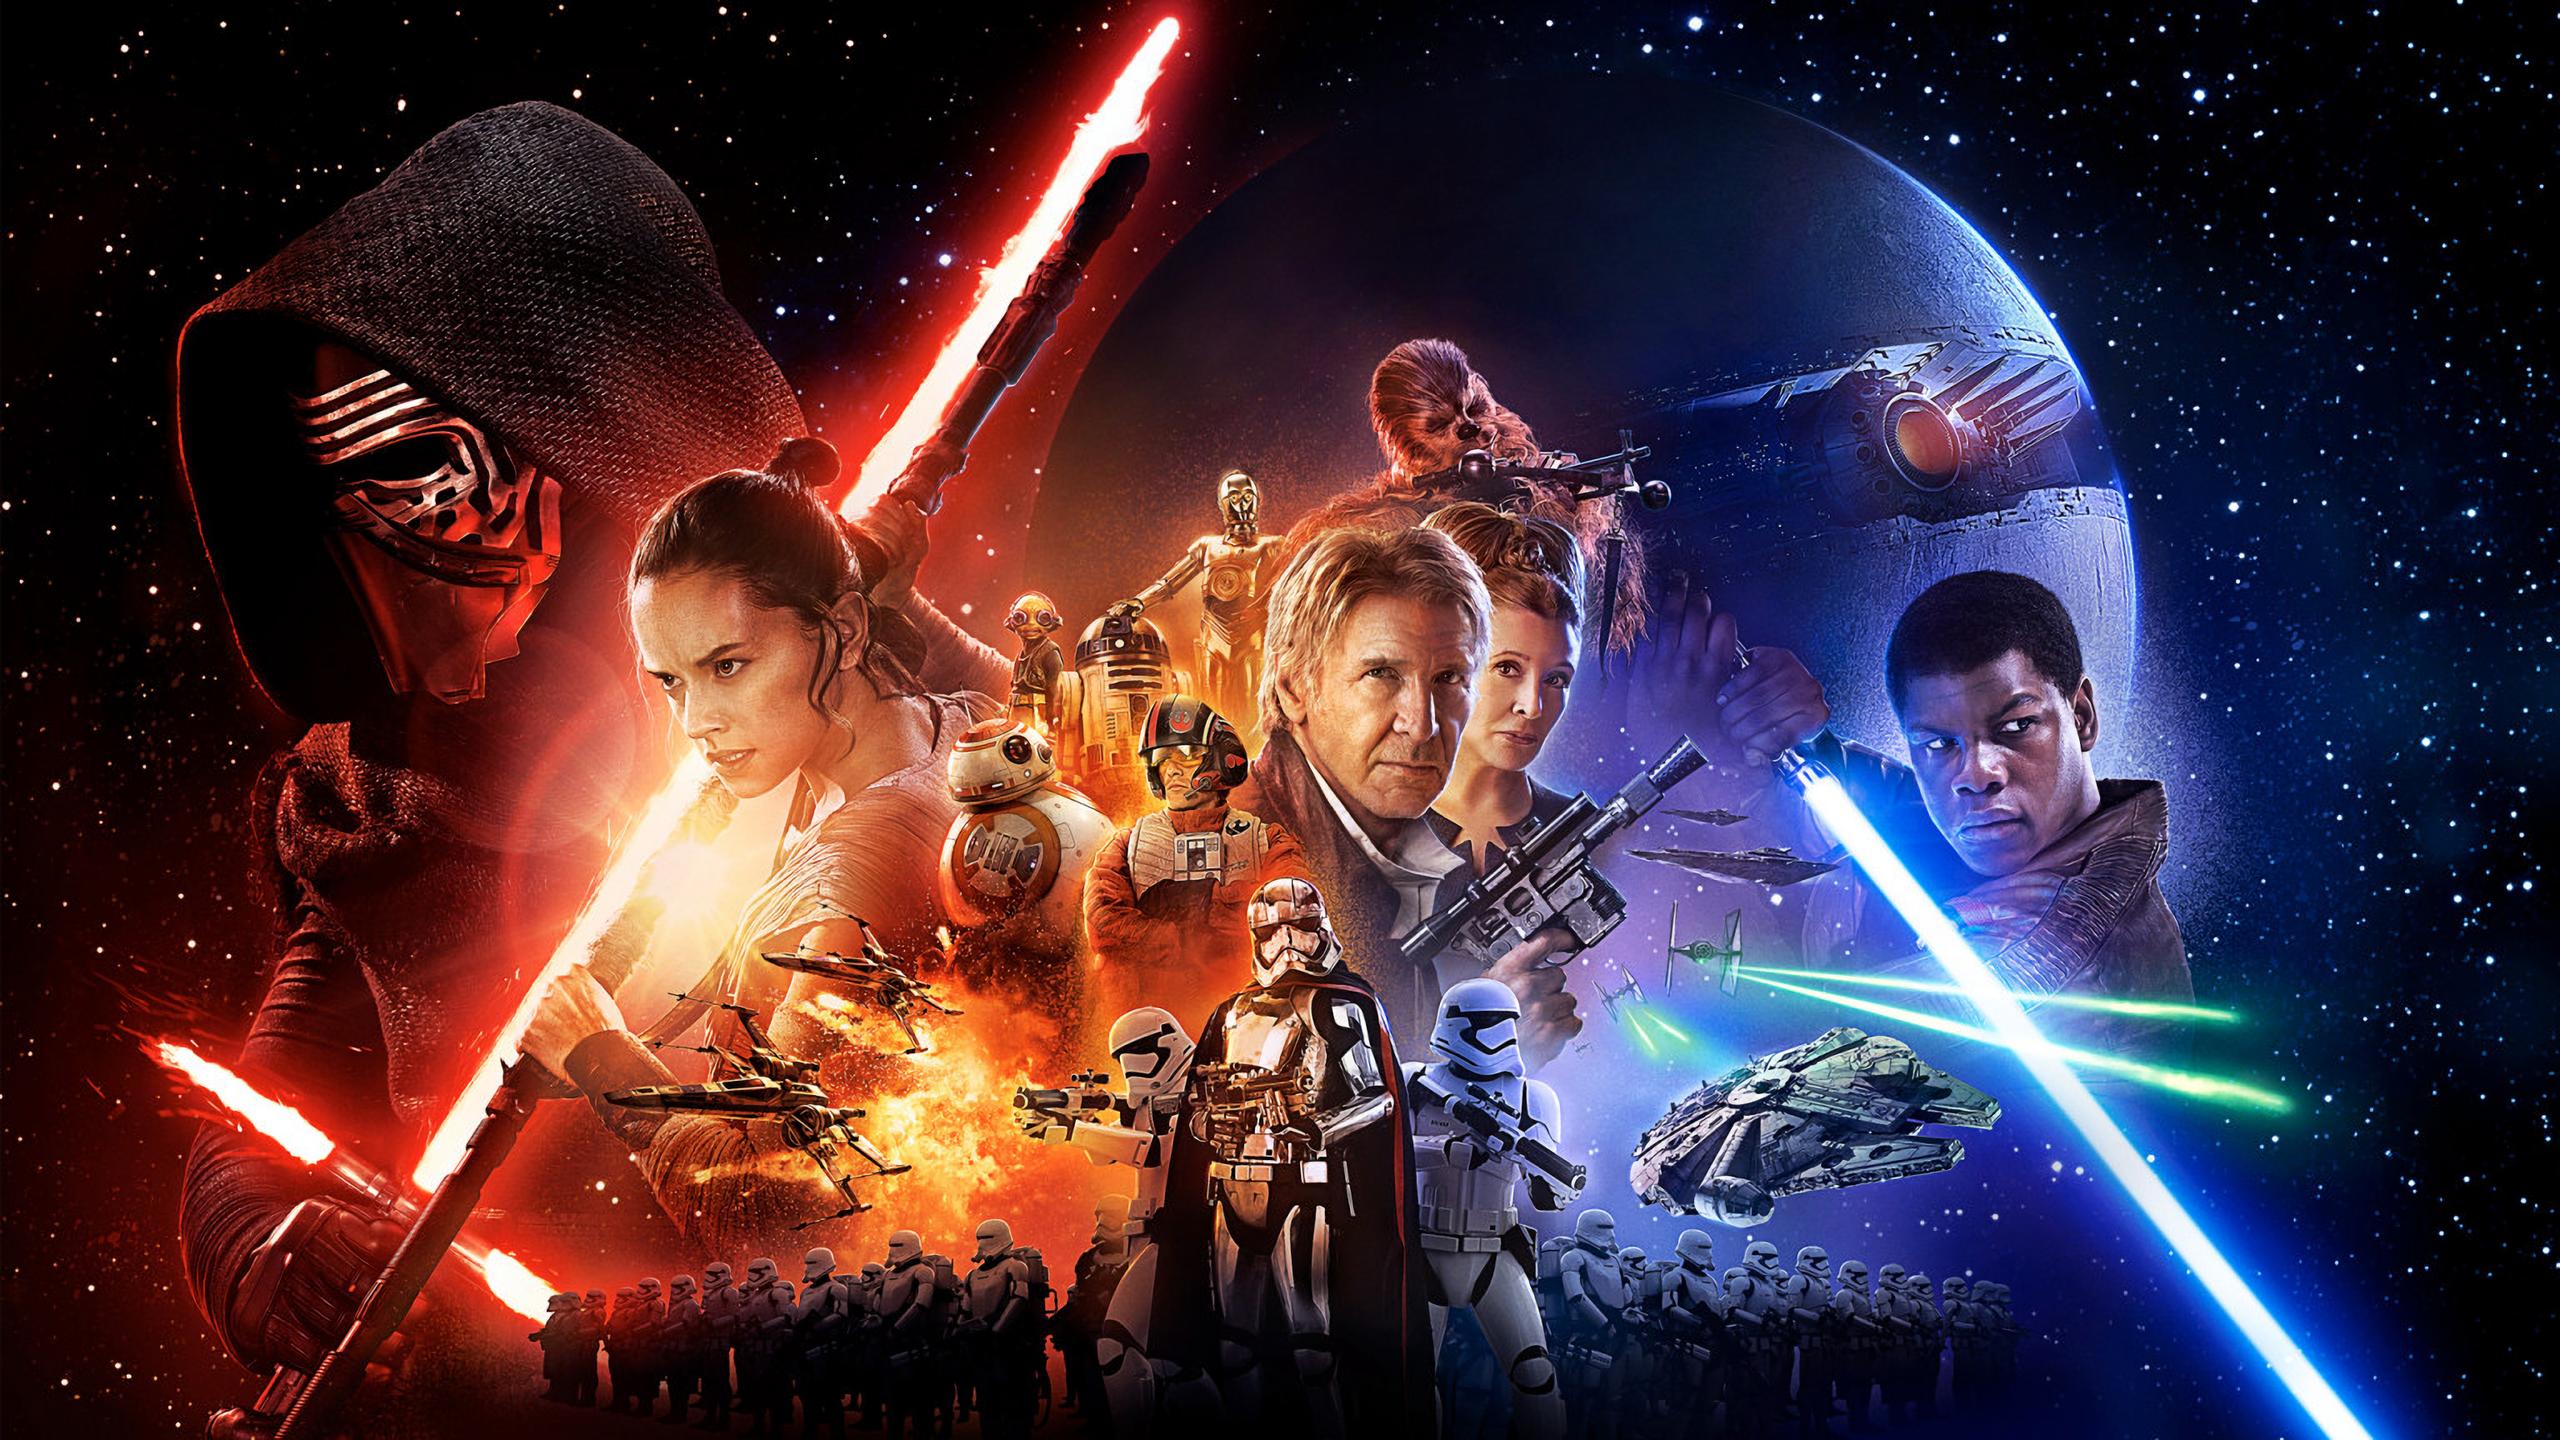  VII The Force Awakens HD Wallpapers Backgrounds